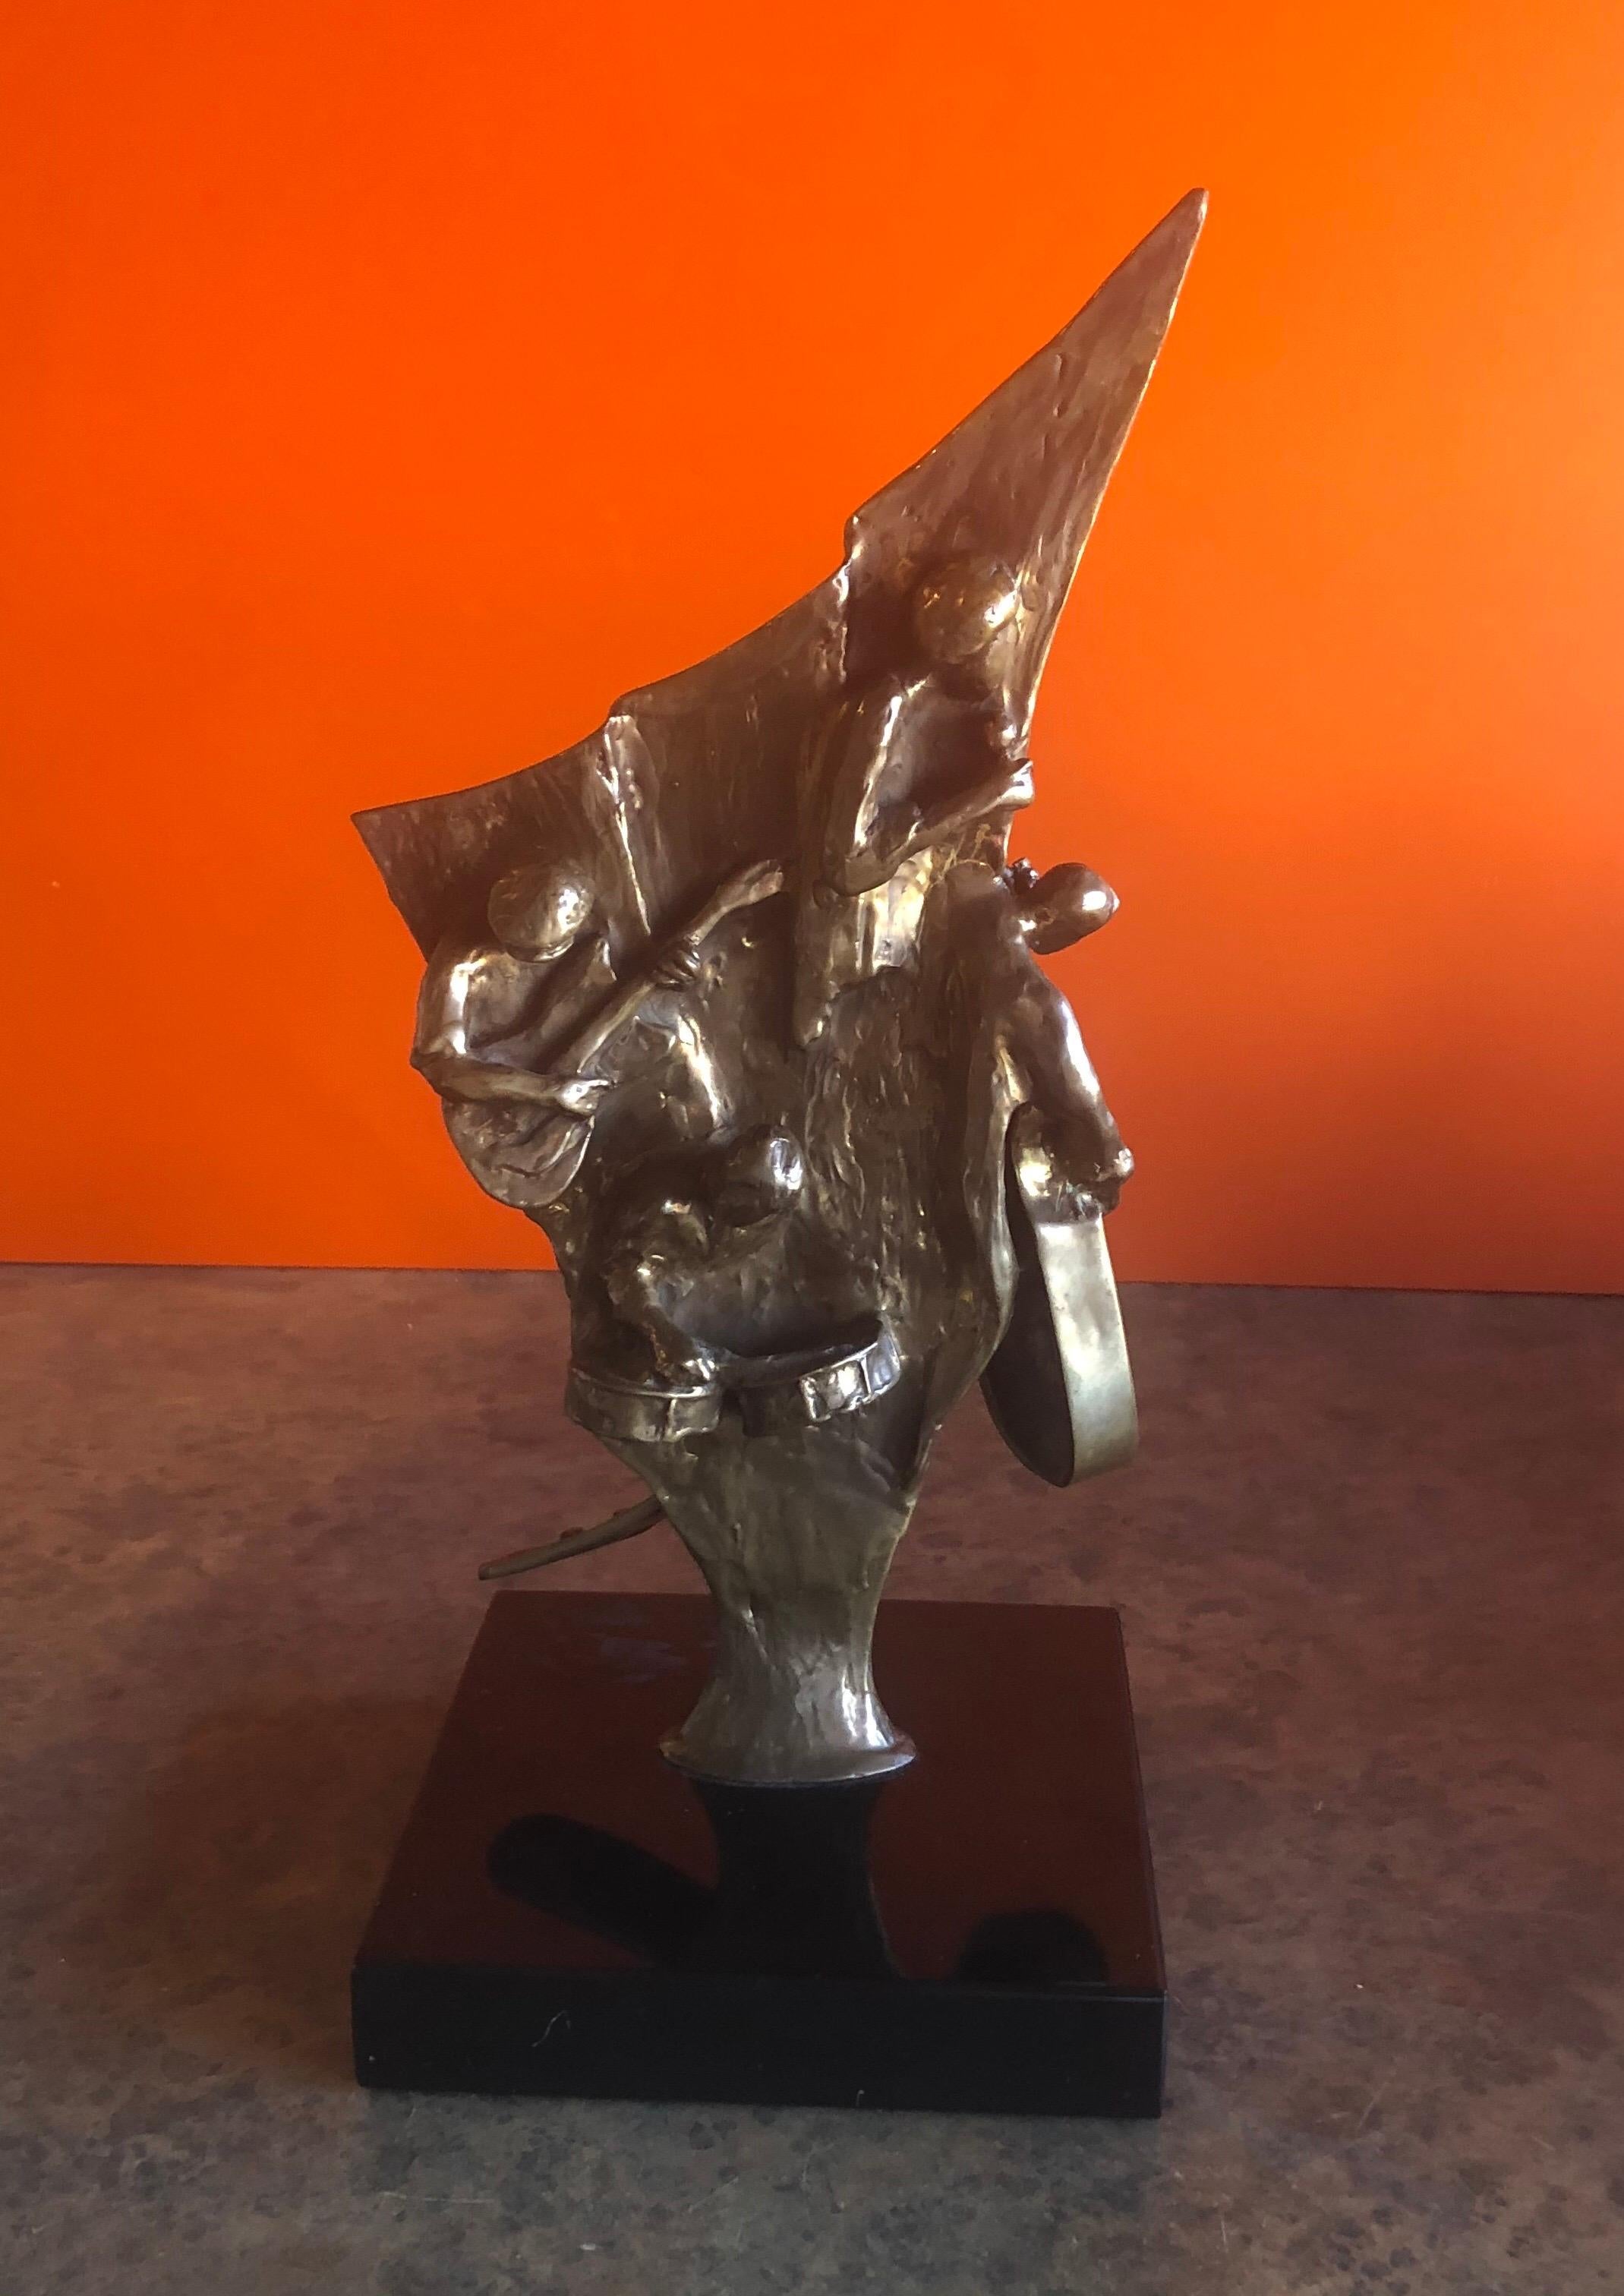 A very unique two sided bronze jazz musician sculpture on a black marble base by Ed Dwight, circa 1990s. The piece depicts six jazz musicians playing in concert (guitar, drums, lead singer on the front side; a sax, trumpet, bass and keyboard on the